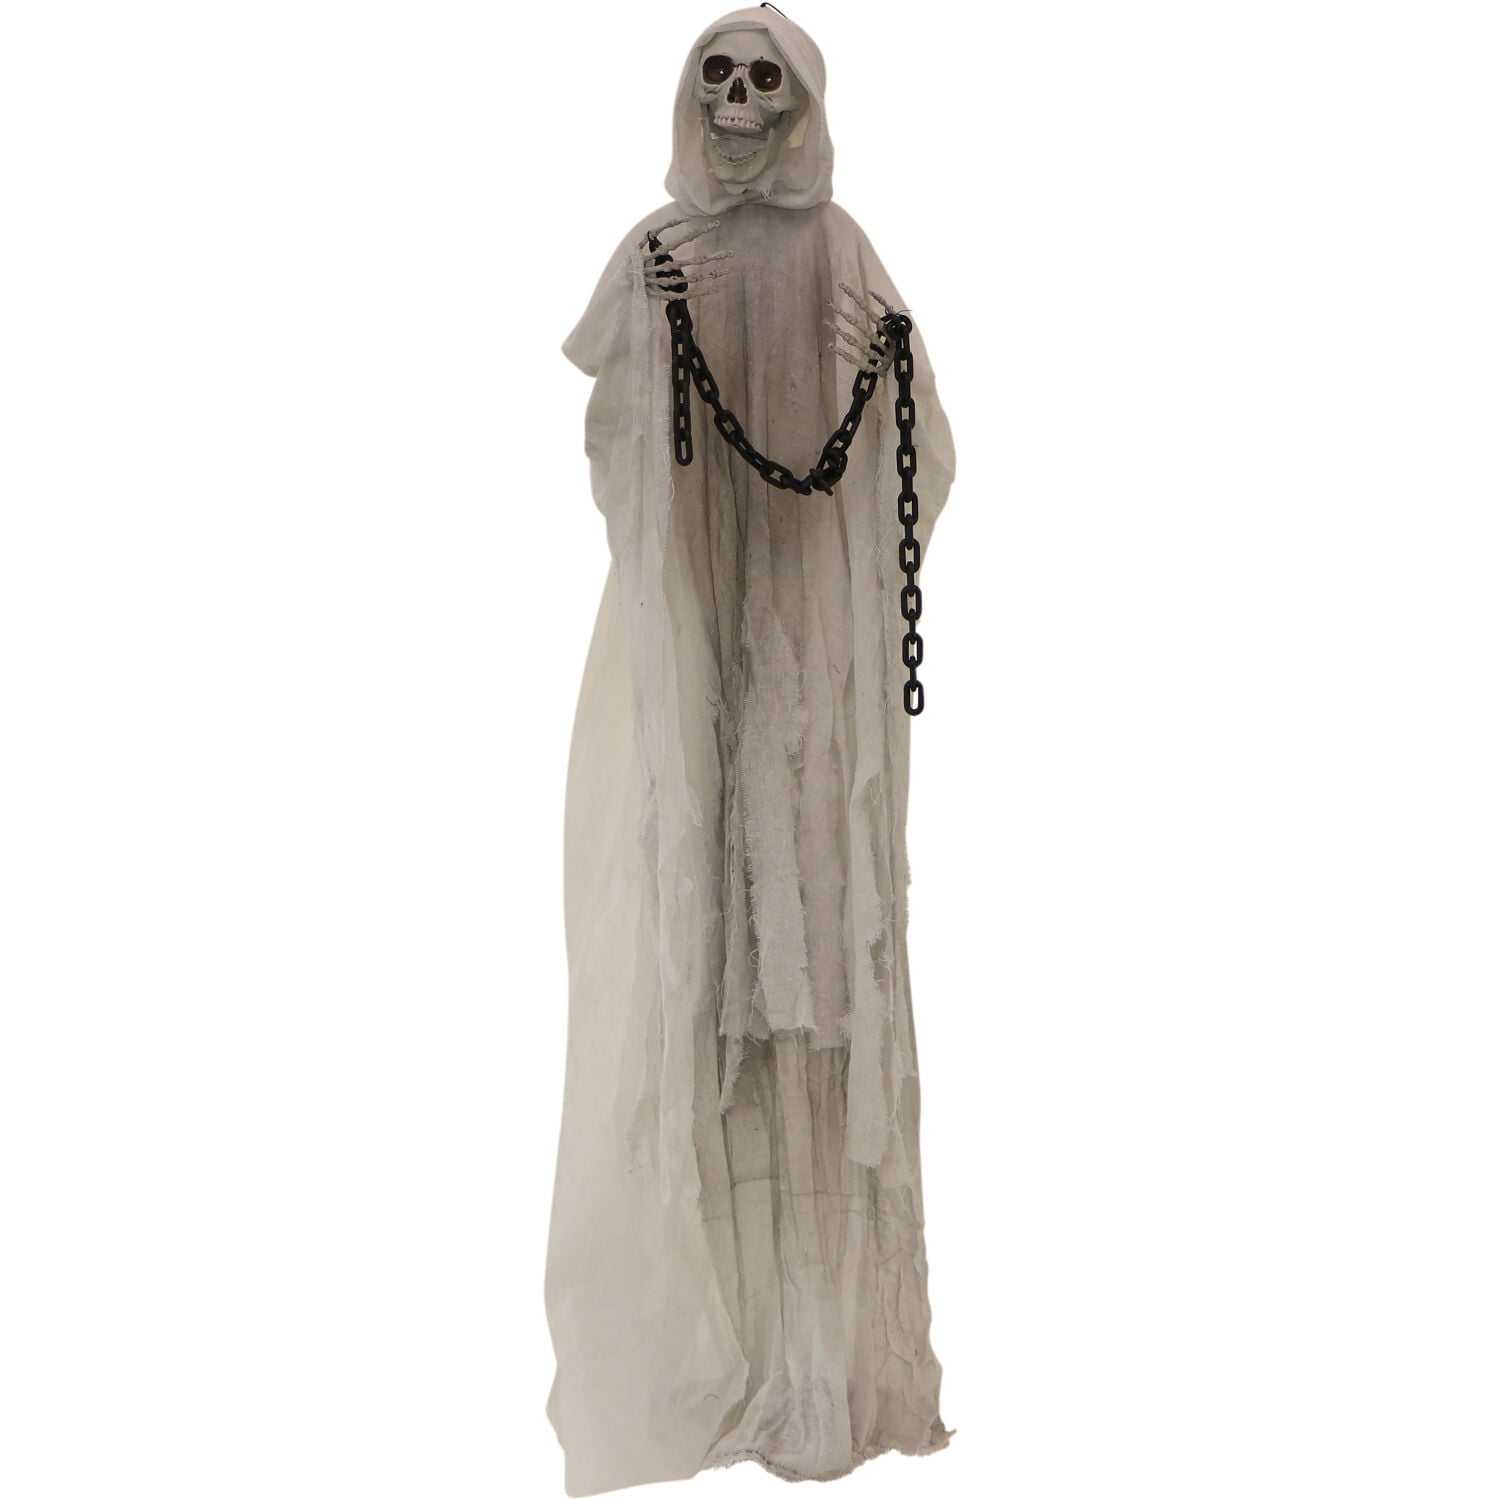 Haunted Hill Farm 6.25 ft. Reaper with Chains Dressed in White/Gray ...